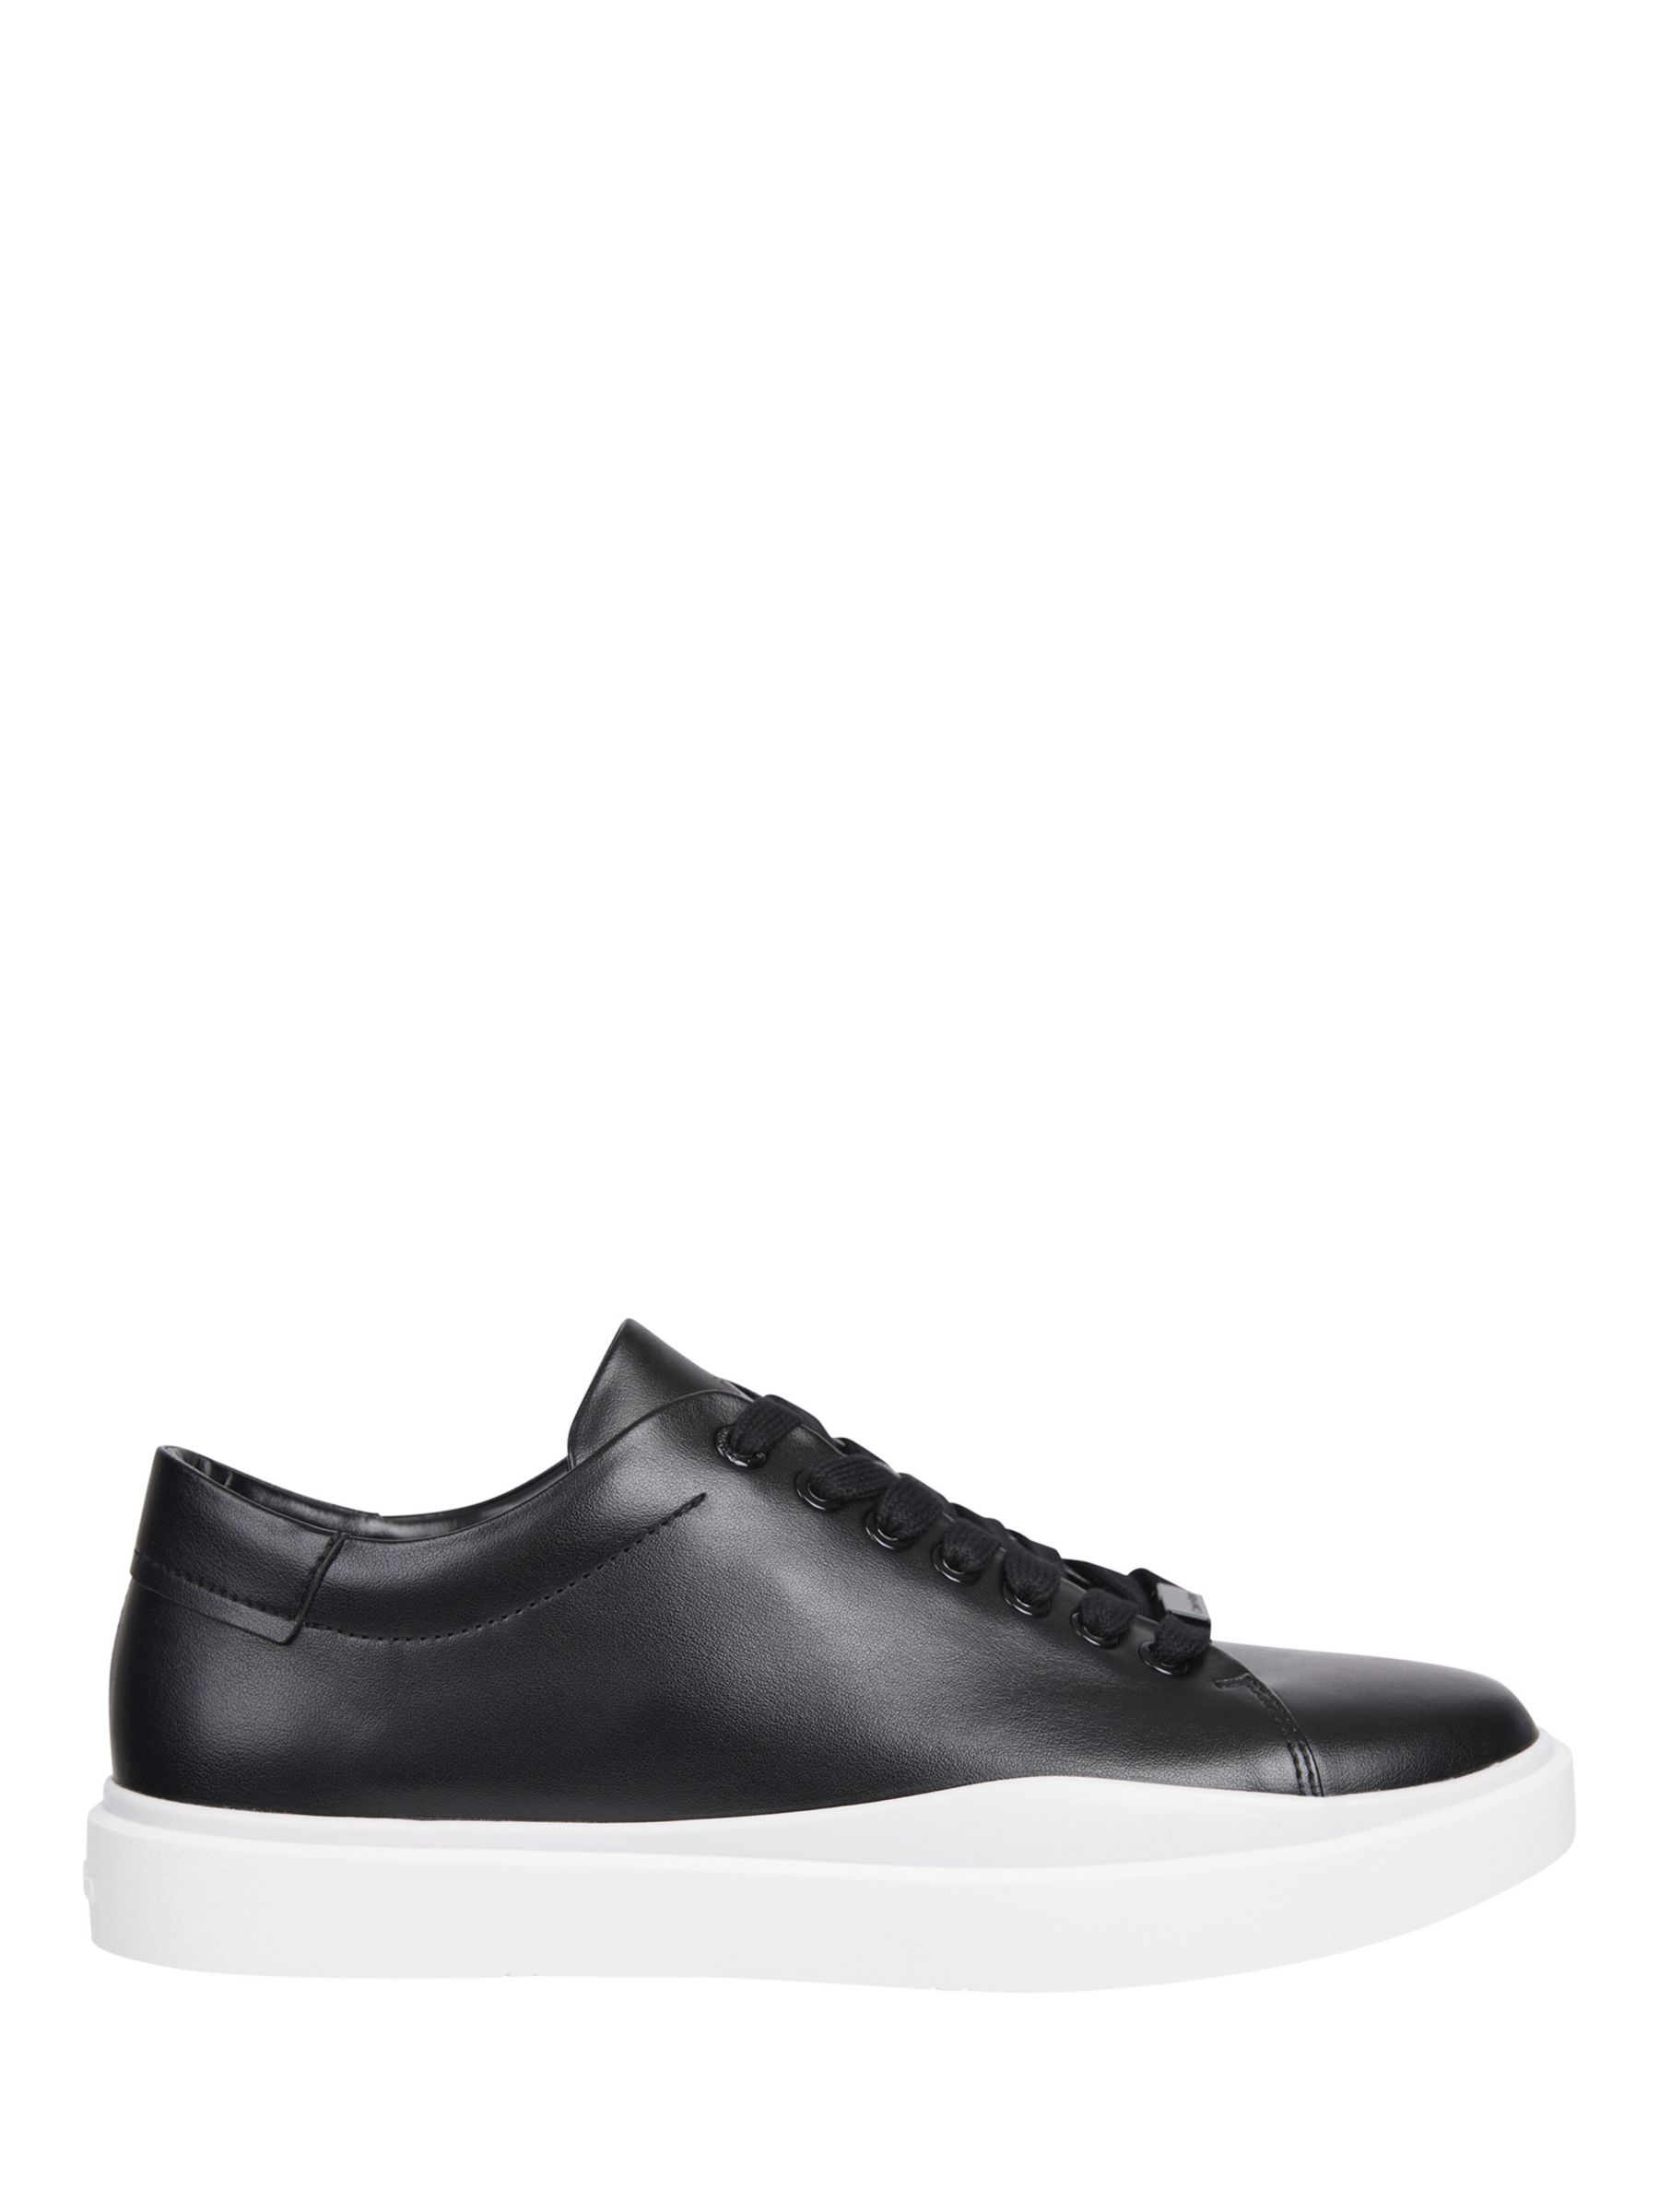 Buy Calvin Klein Lace Up Low Top Trainers, CK Black Online at johnlewis.com